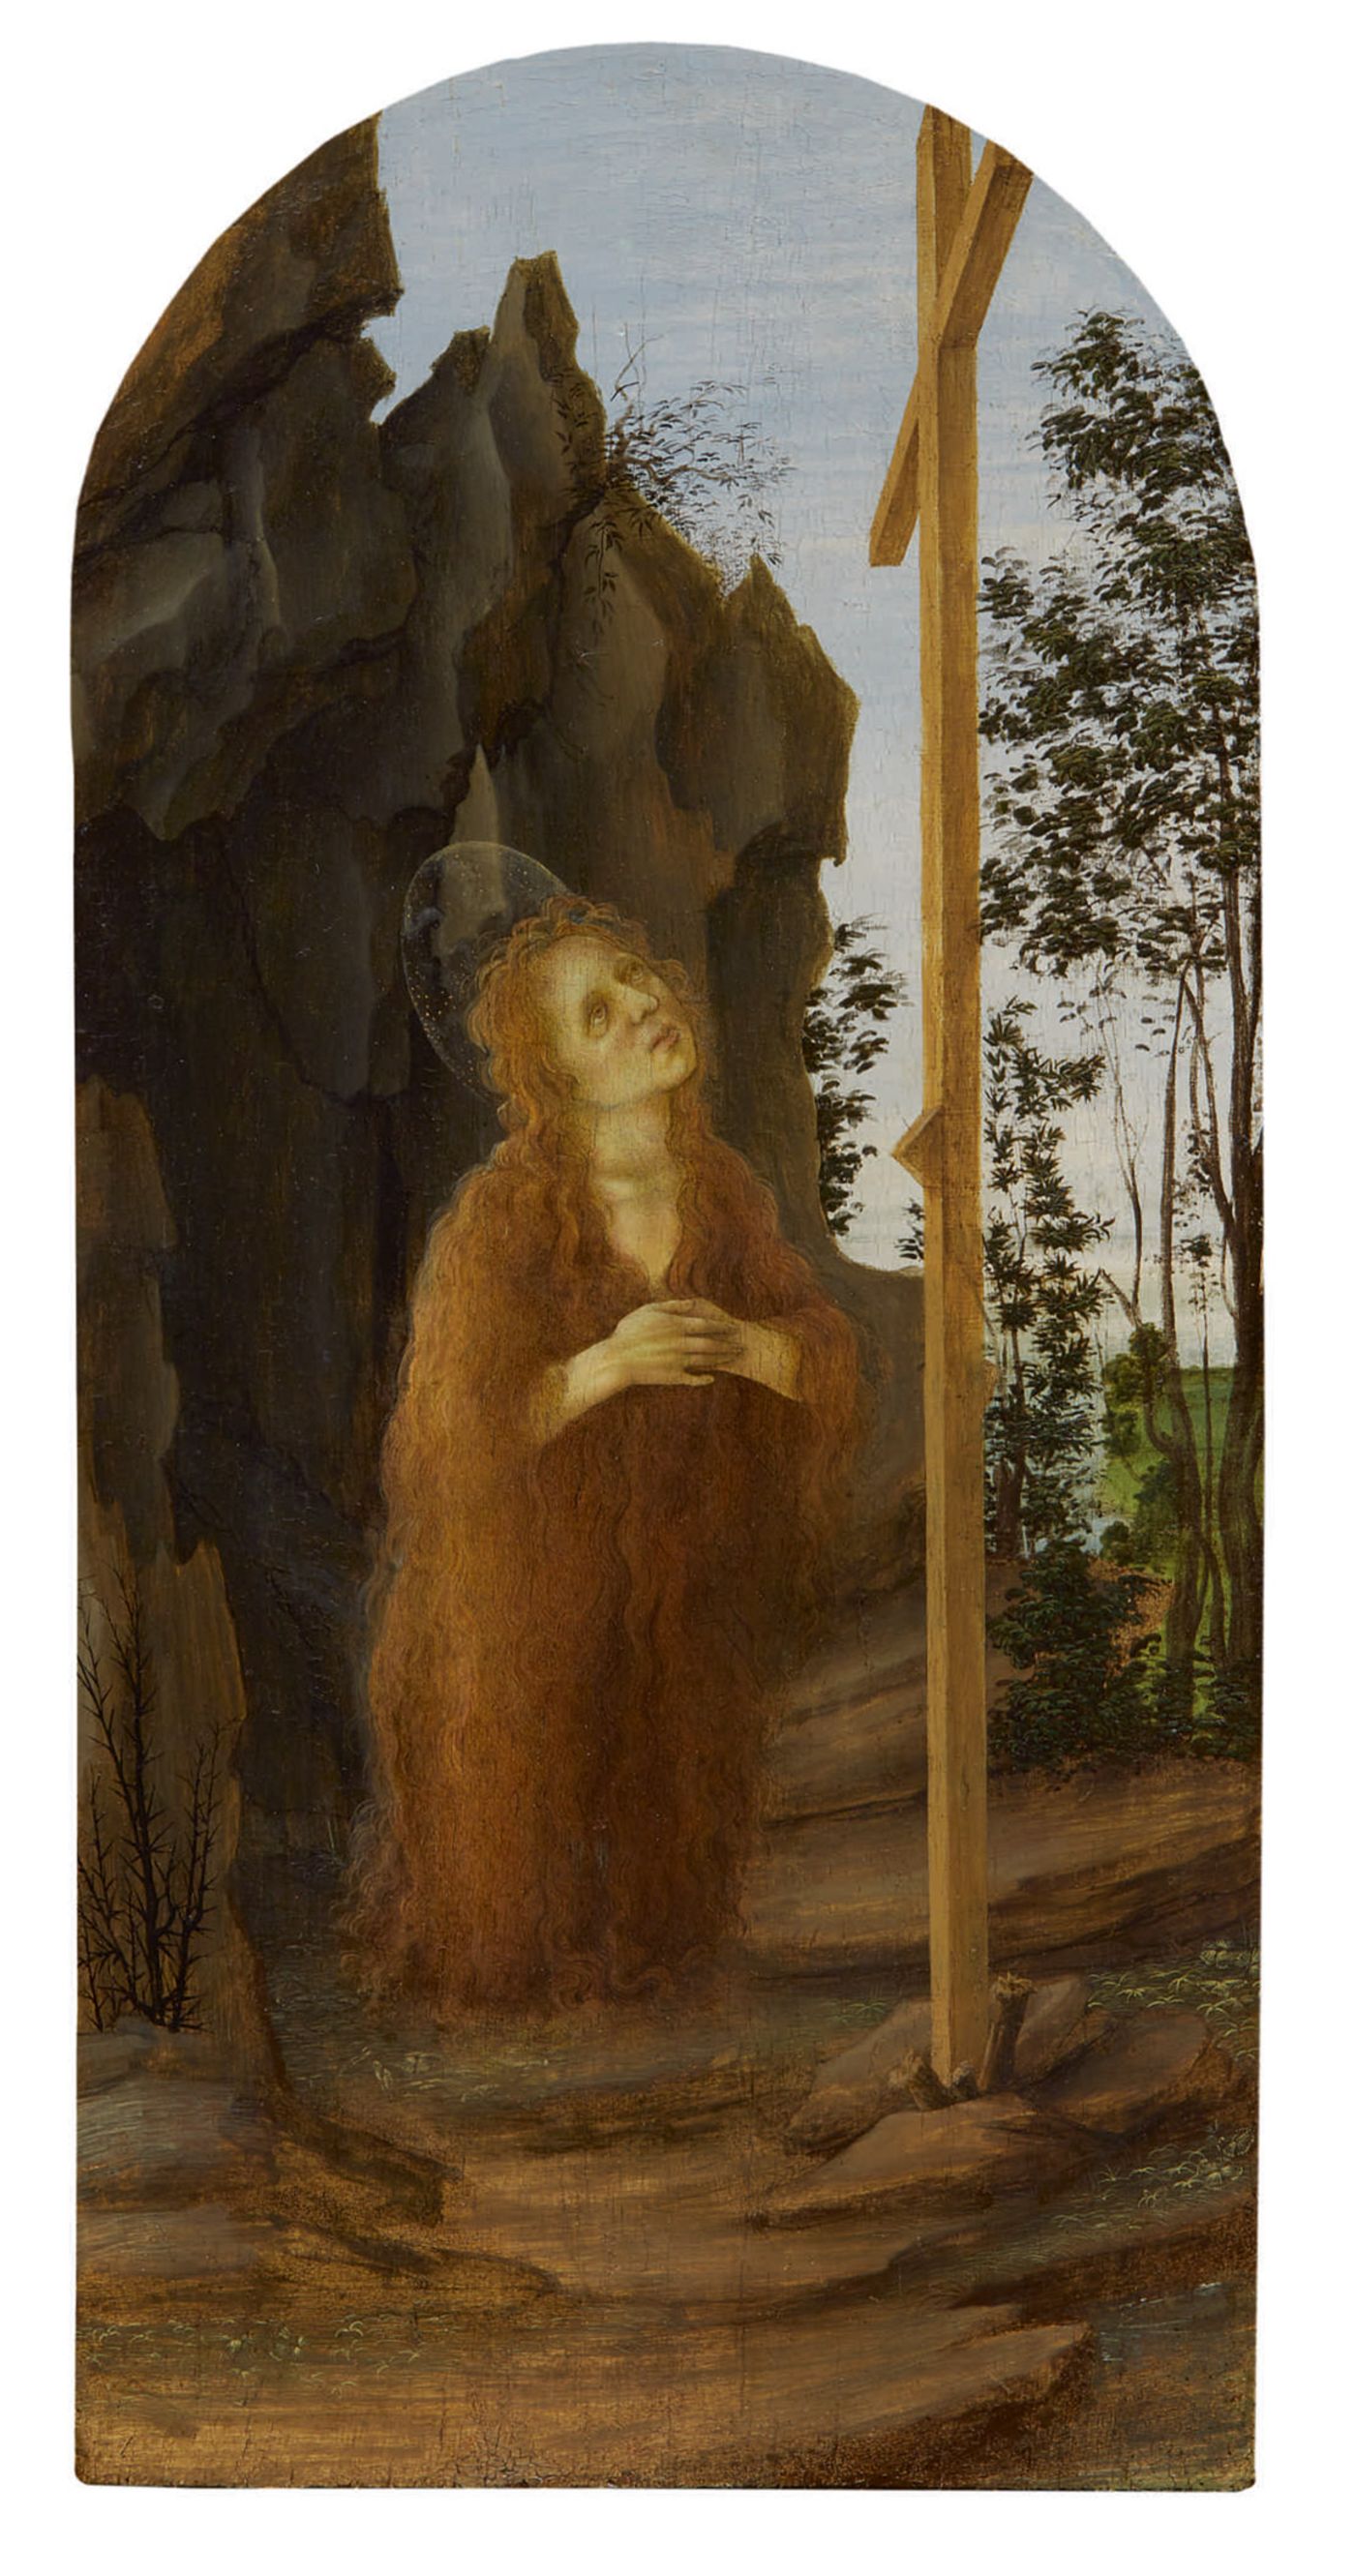 Filippino Lippi, Penitent Mary Magdalene Adoring the True Cross in a Rocky Landscape from the collection of Hester Diamond, estimated to sell for $2 million to $3 million. Photo courtesy of Sotheby's.